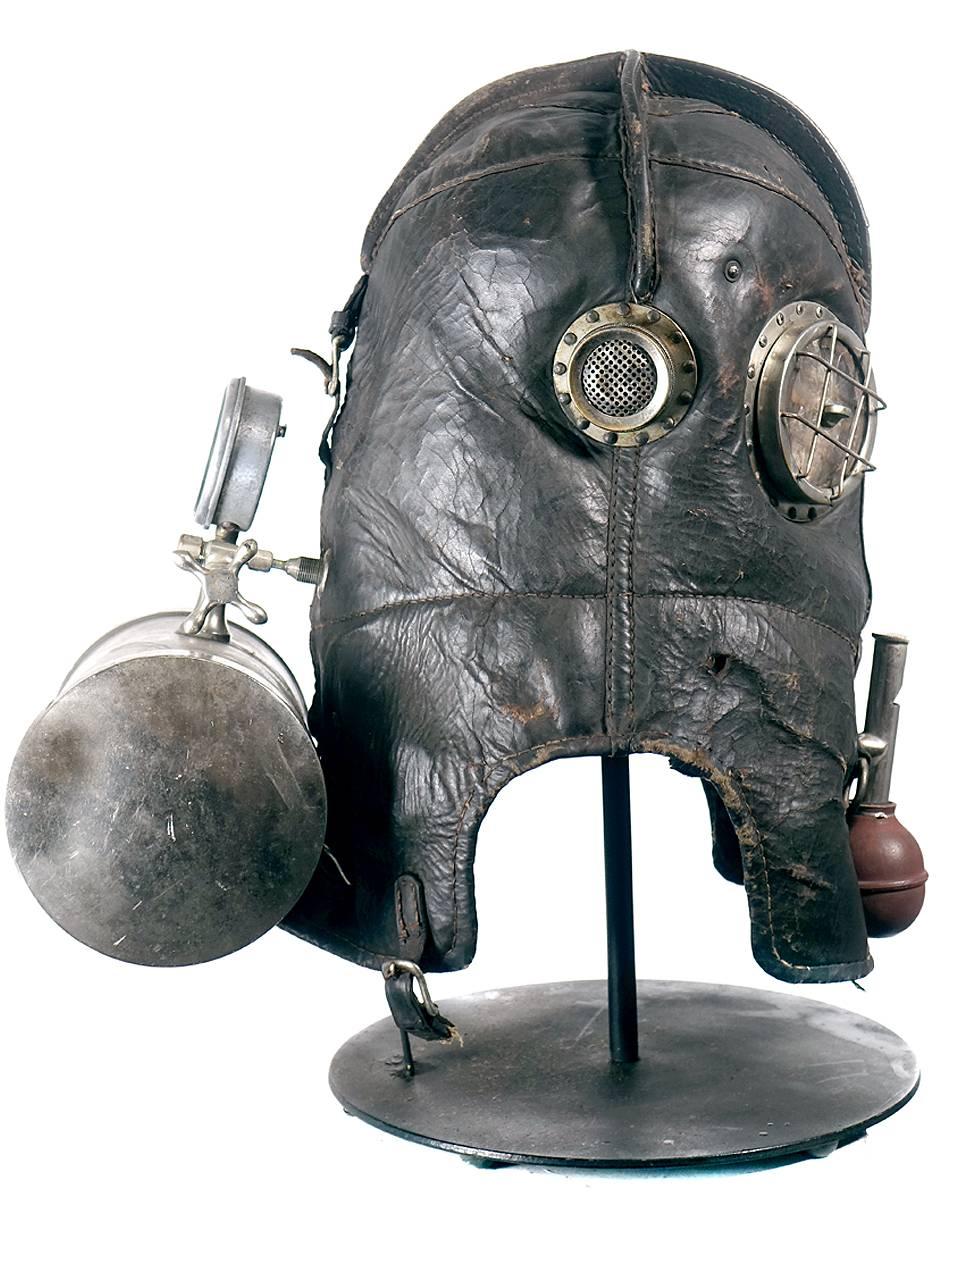 This is the celebrated Vajen-Bader smoke rescue helmet. These full face helmets are very rare and found mostly in museum collections. It’s considered the Holy Grail for collectors of early Industrial technology and fire rescue. It is also thought of